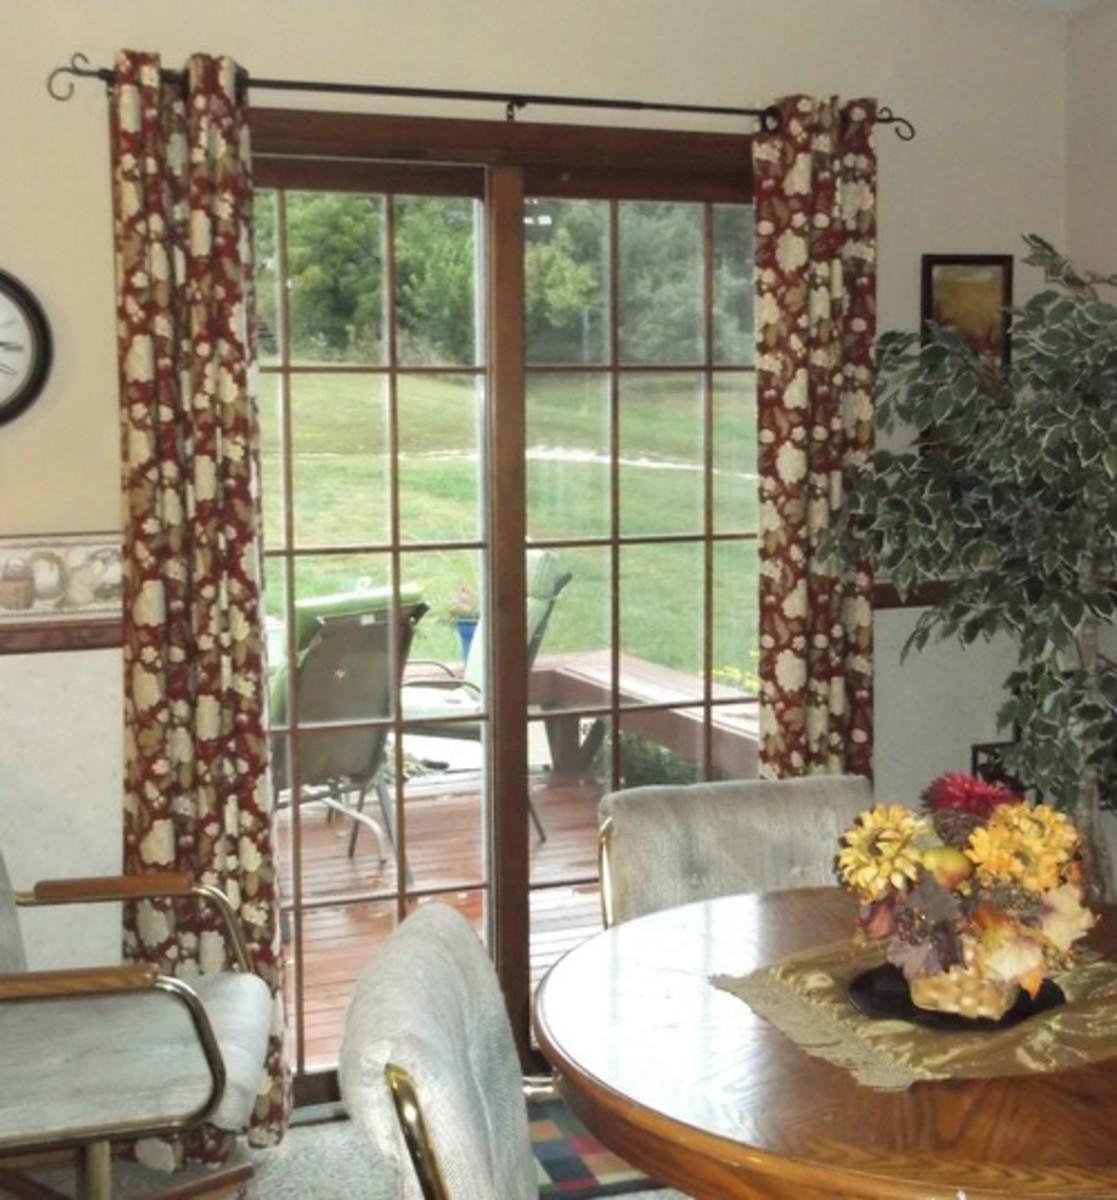 Make your own custom drapes with grommets that the rod passes through.